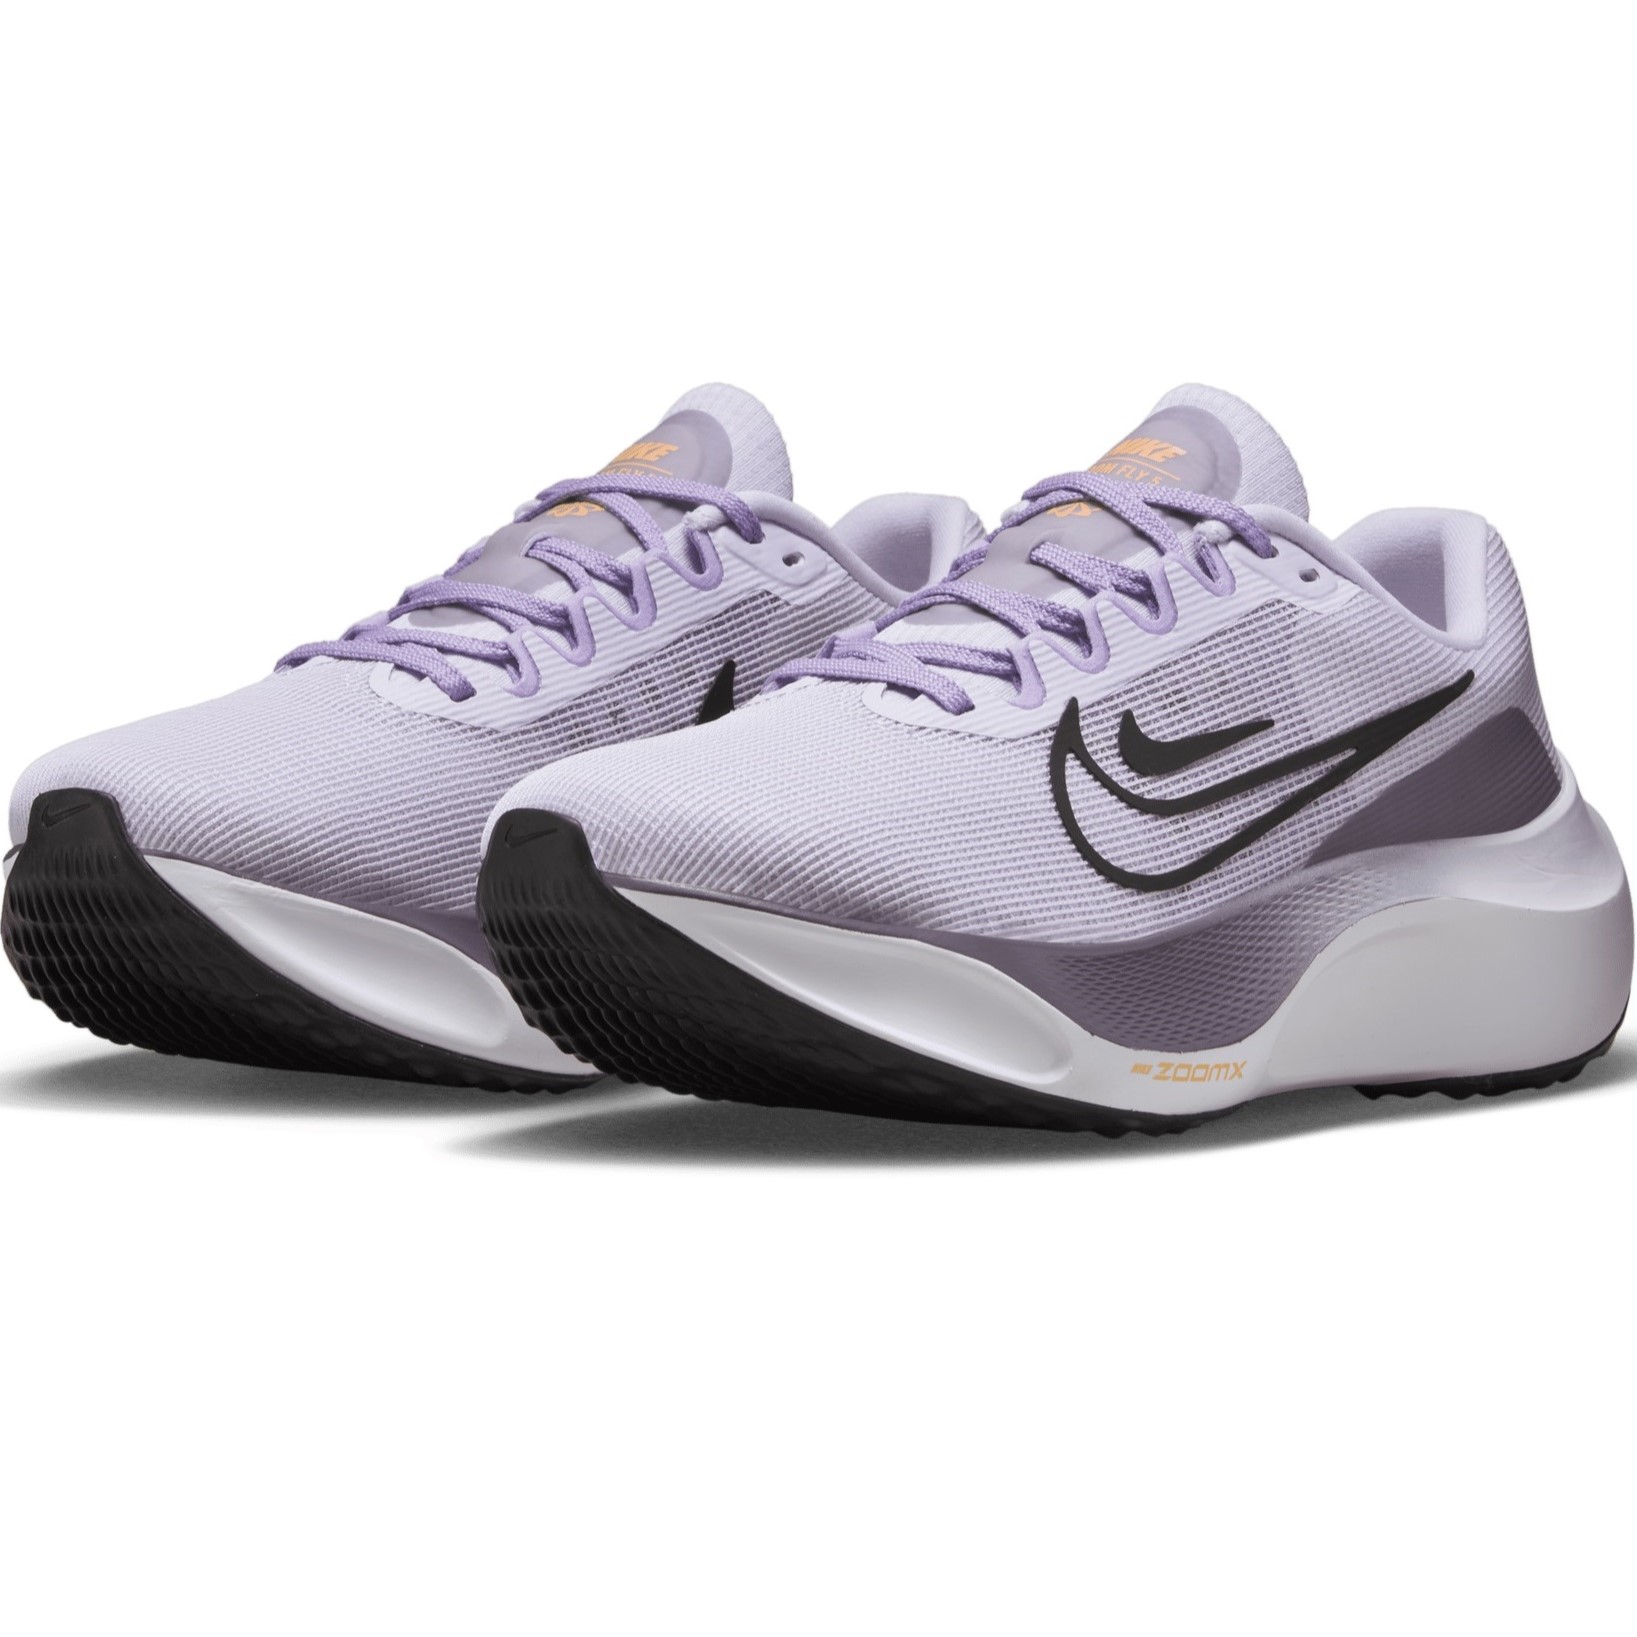 GIÀY THỂ THAO NIKE NỮ ZOOM FLY 5 WOMEN ROAD RUNNING SHOES BARELY GRAPE DM8974-500 2